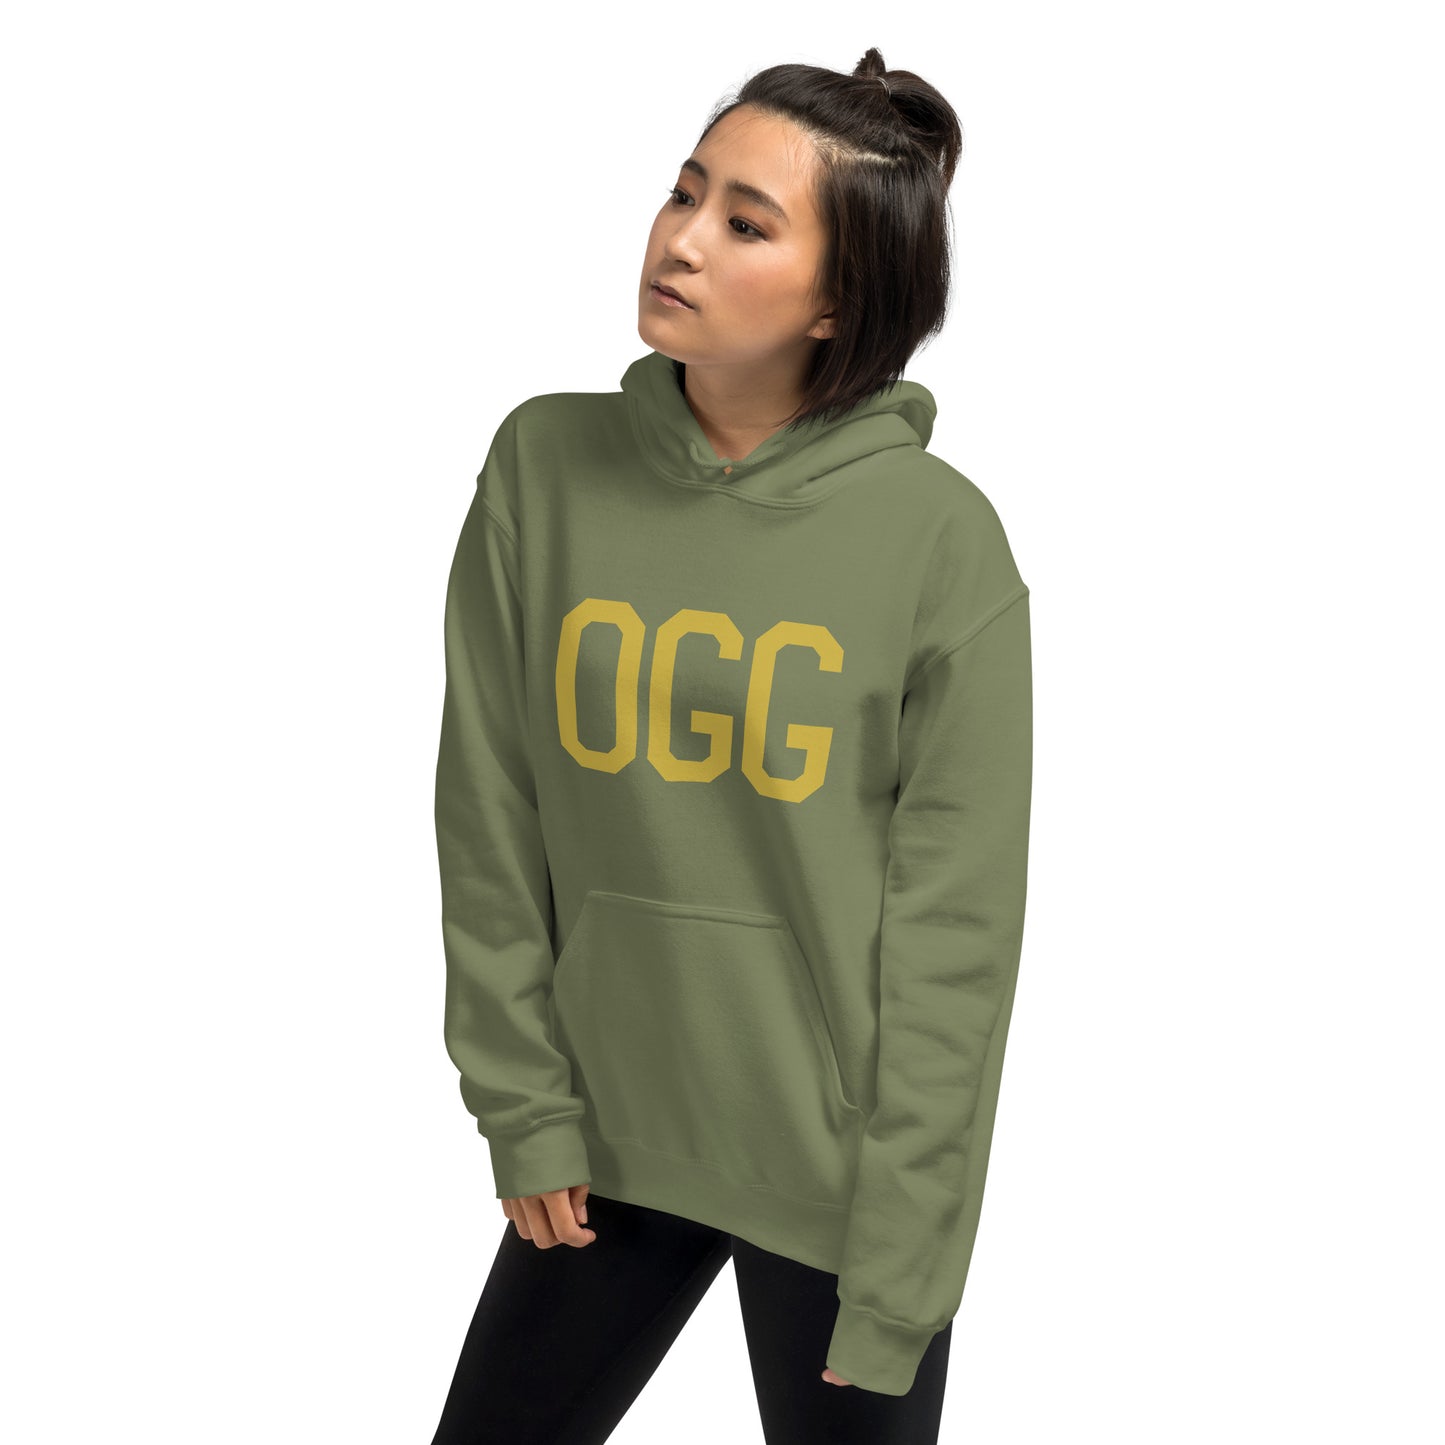 Aviation Gift Unisex Hoodie - Old Gold Graphic • OGG Maui • YHM Designs - Image 10